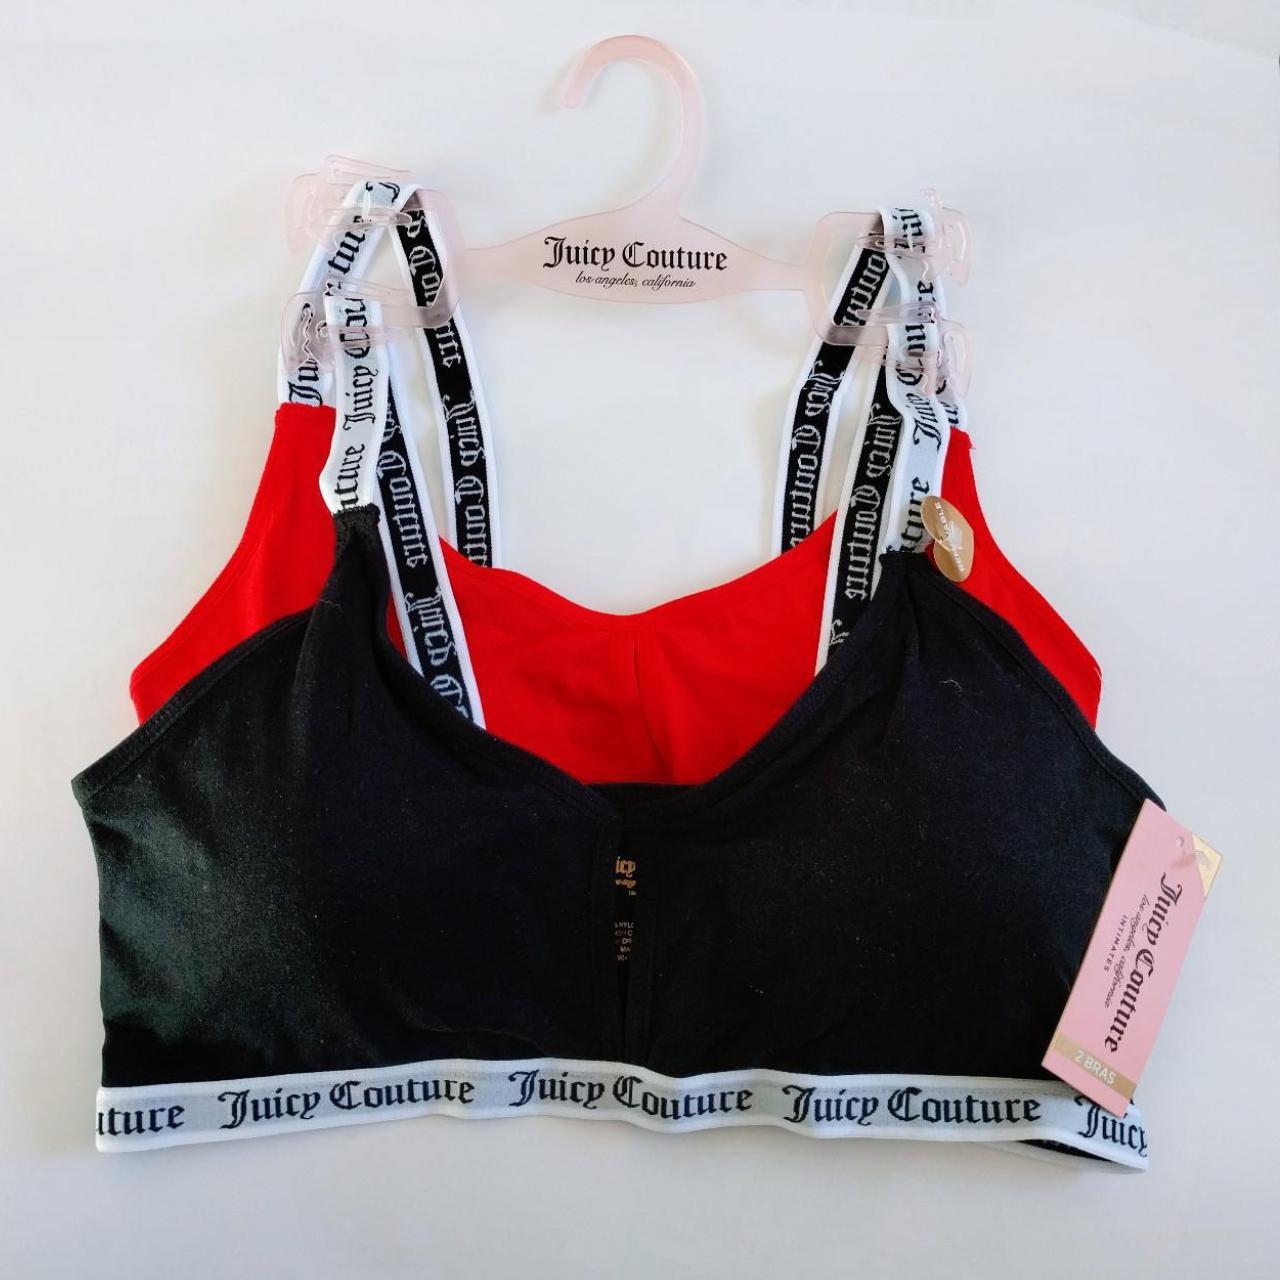 Stylish Juicy Couture Sports Bras - Set of 2